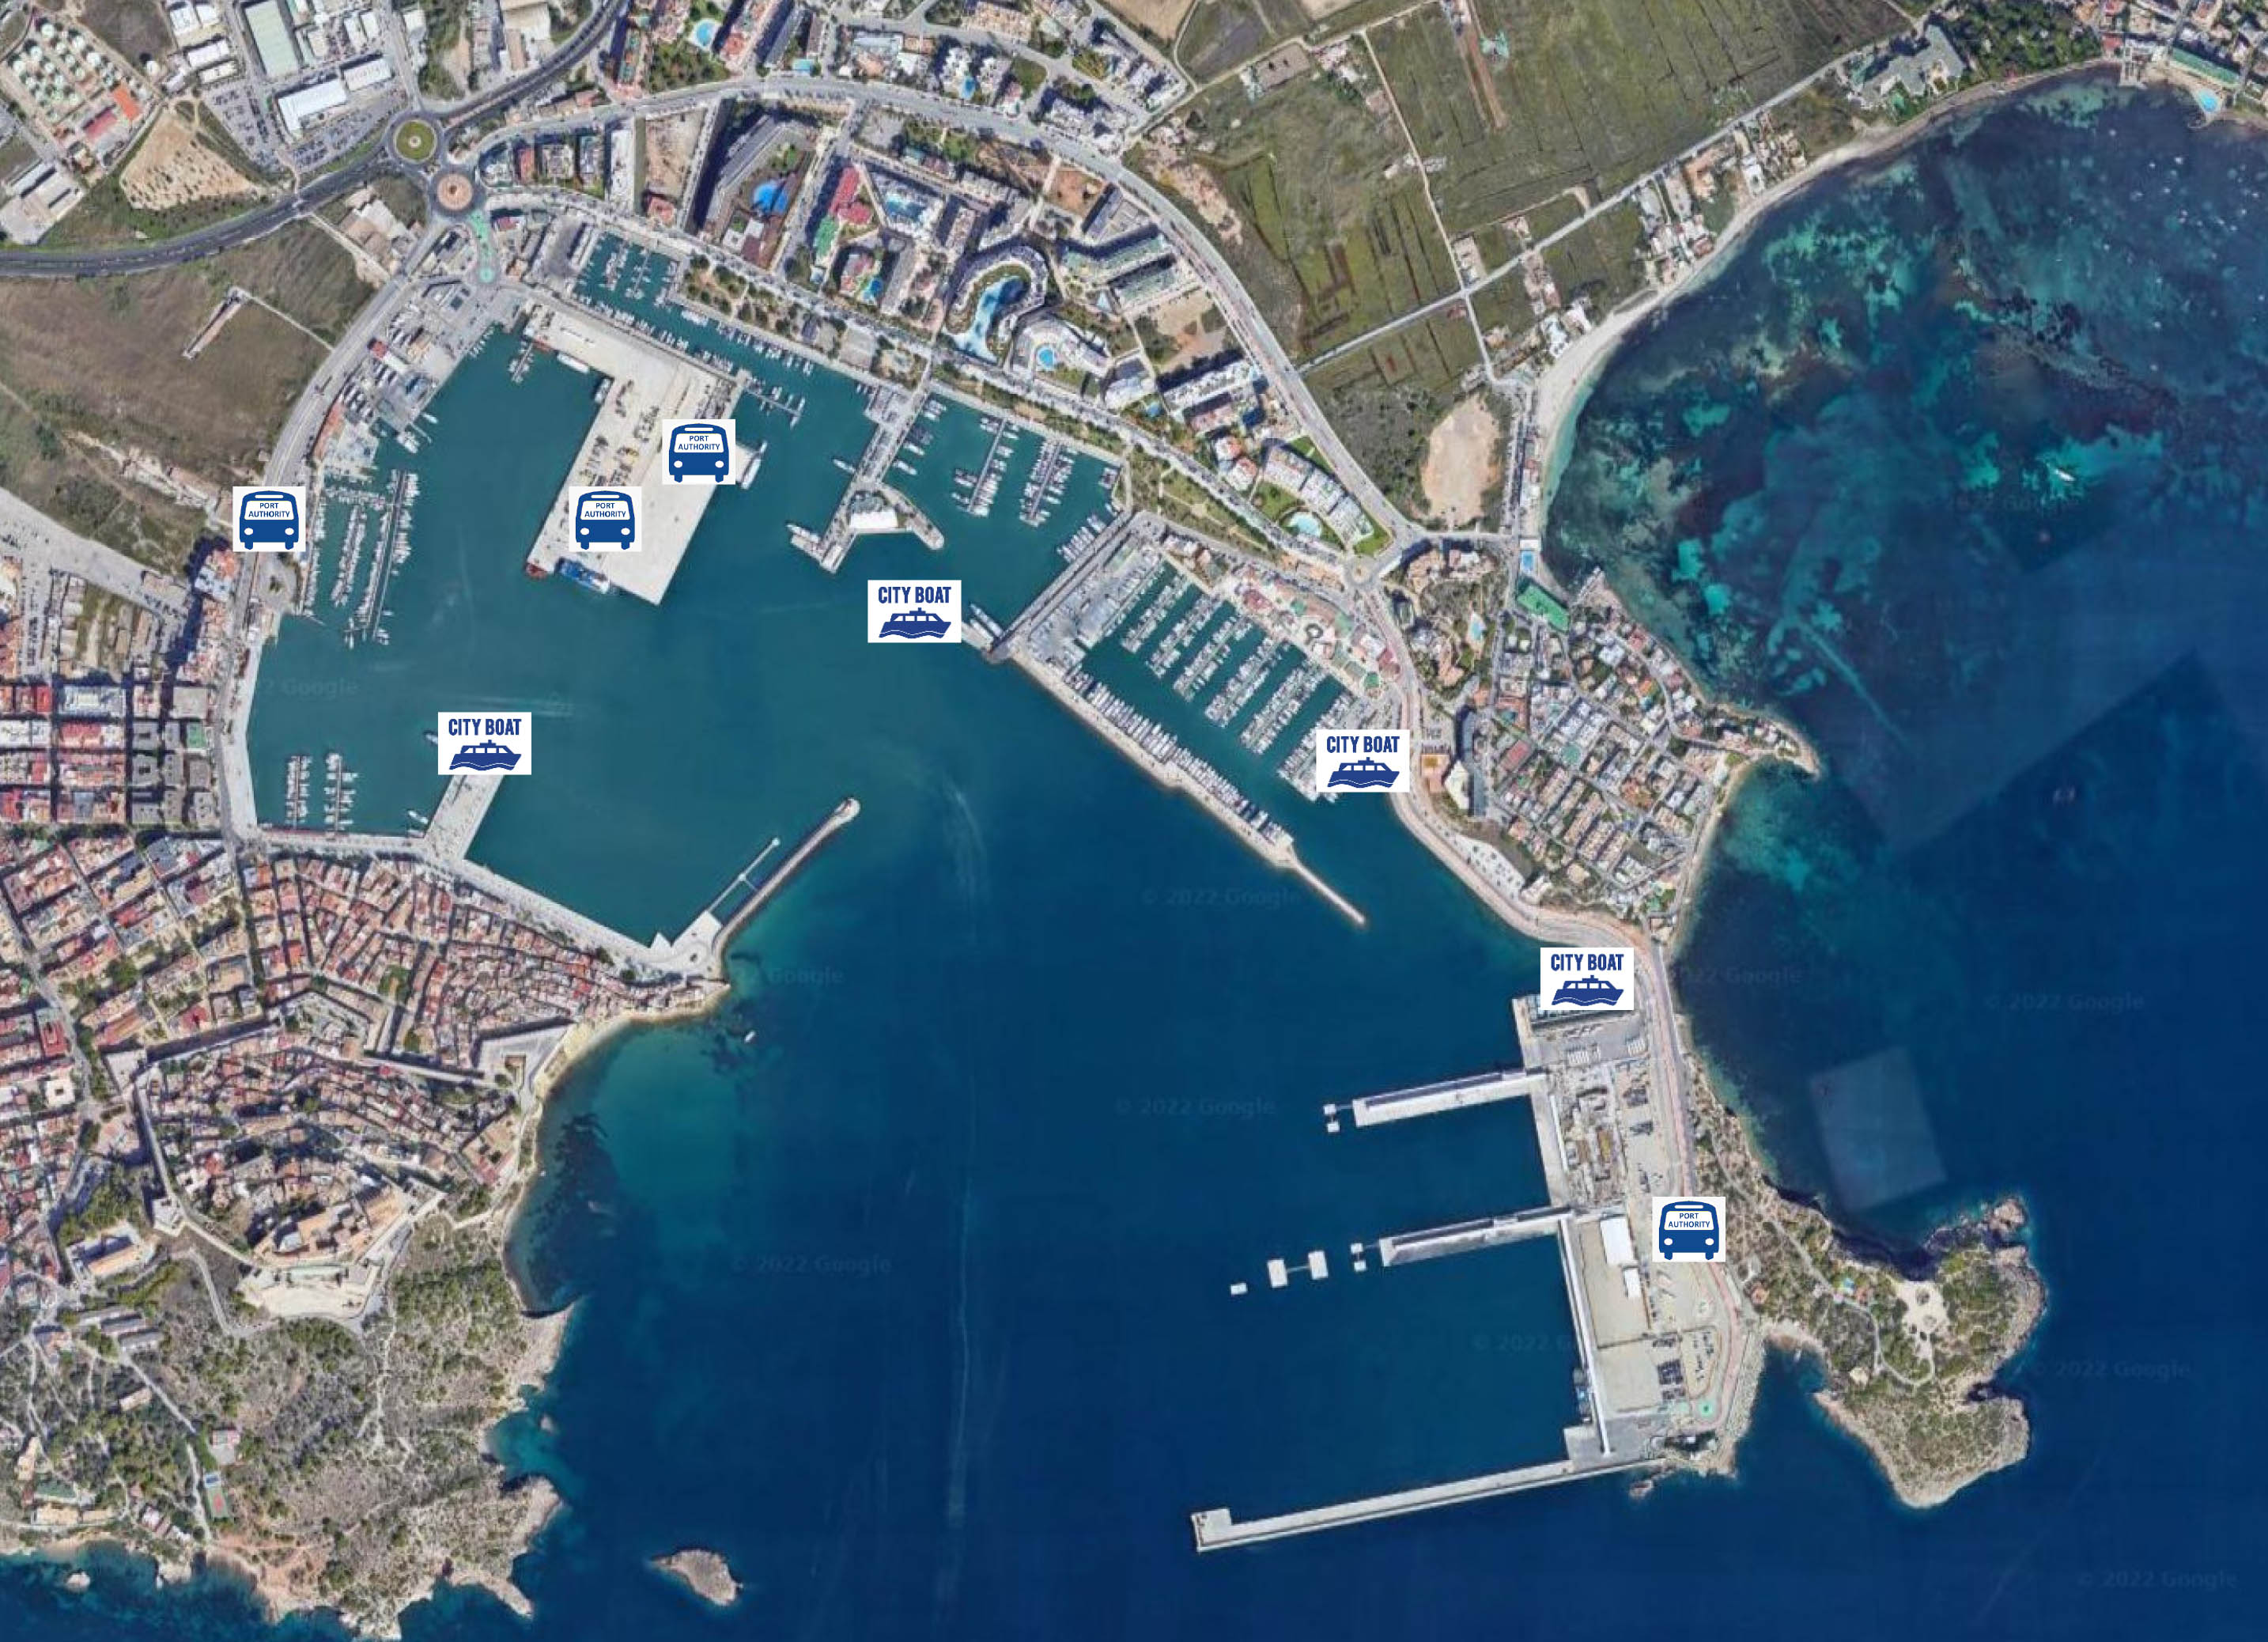 The APB resumes the Port Bus service in the port of Eivissa and improves intra-port connections